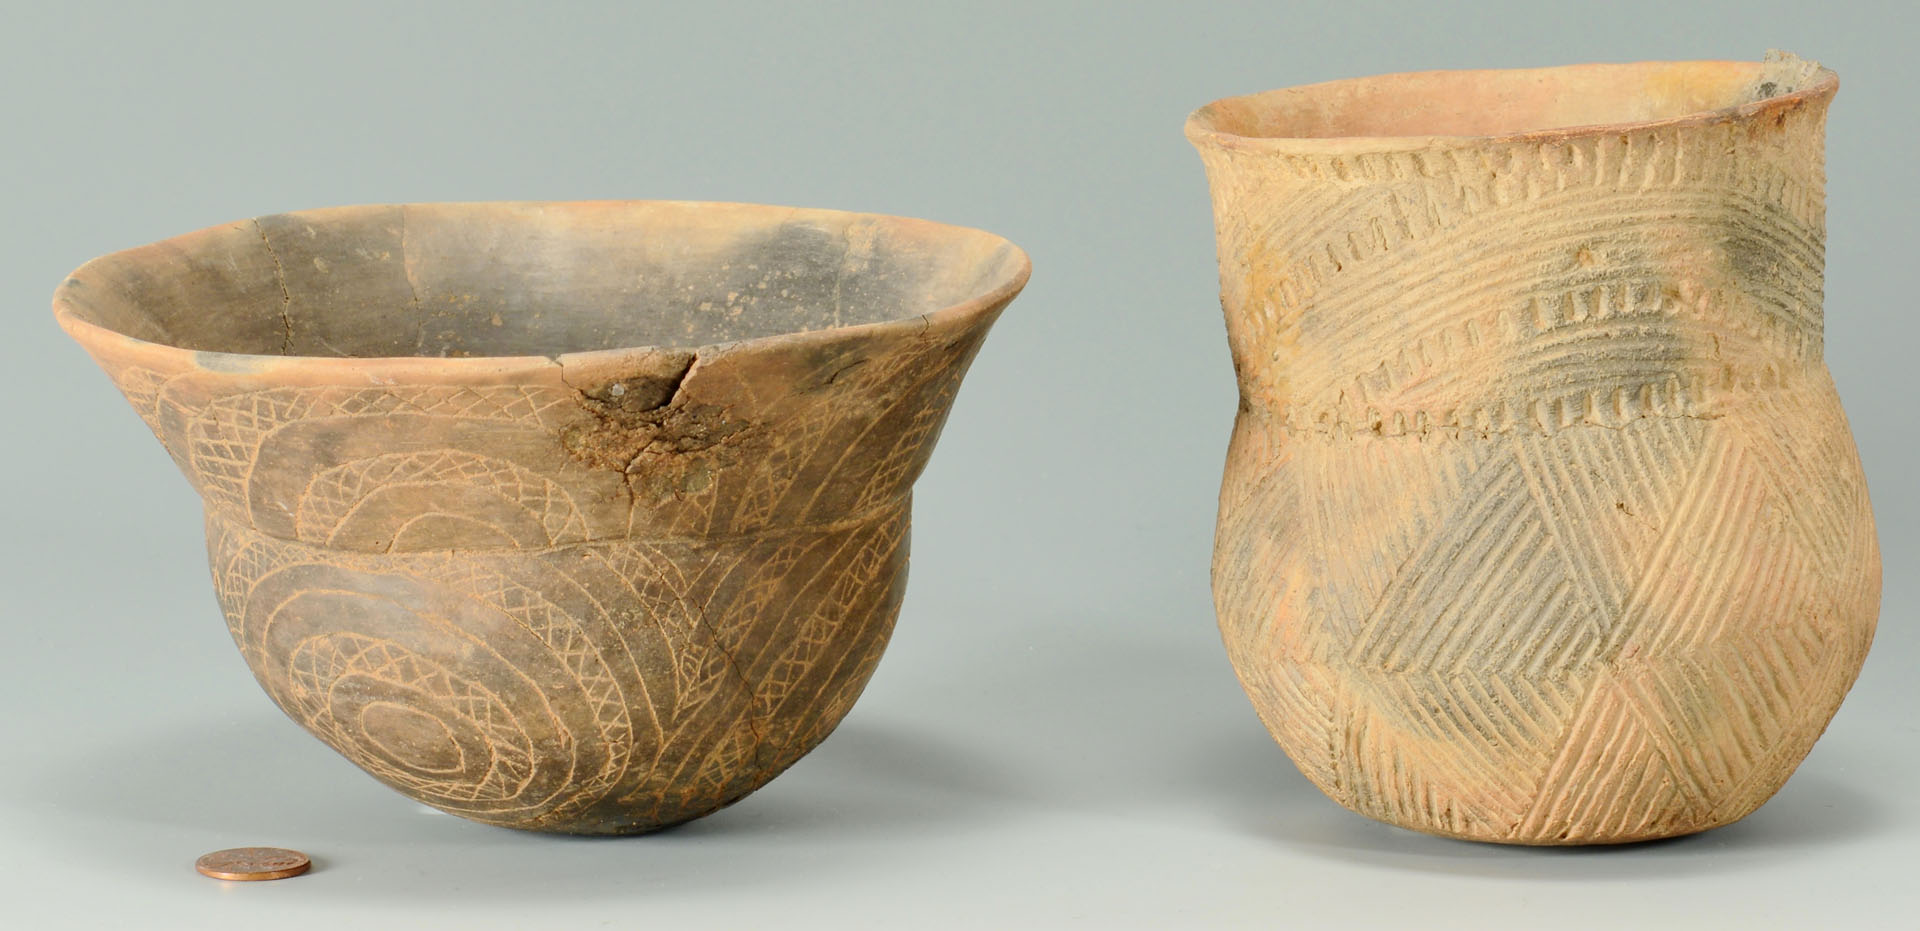 Lot 400: 2 Caddo Incised and Engraved Vessels, Jar and Bowl